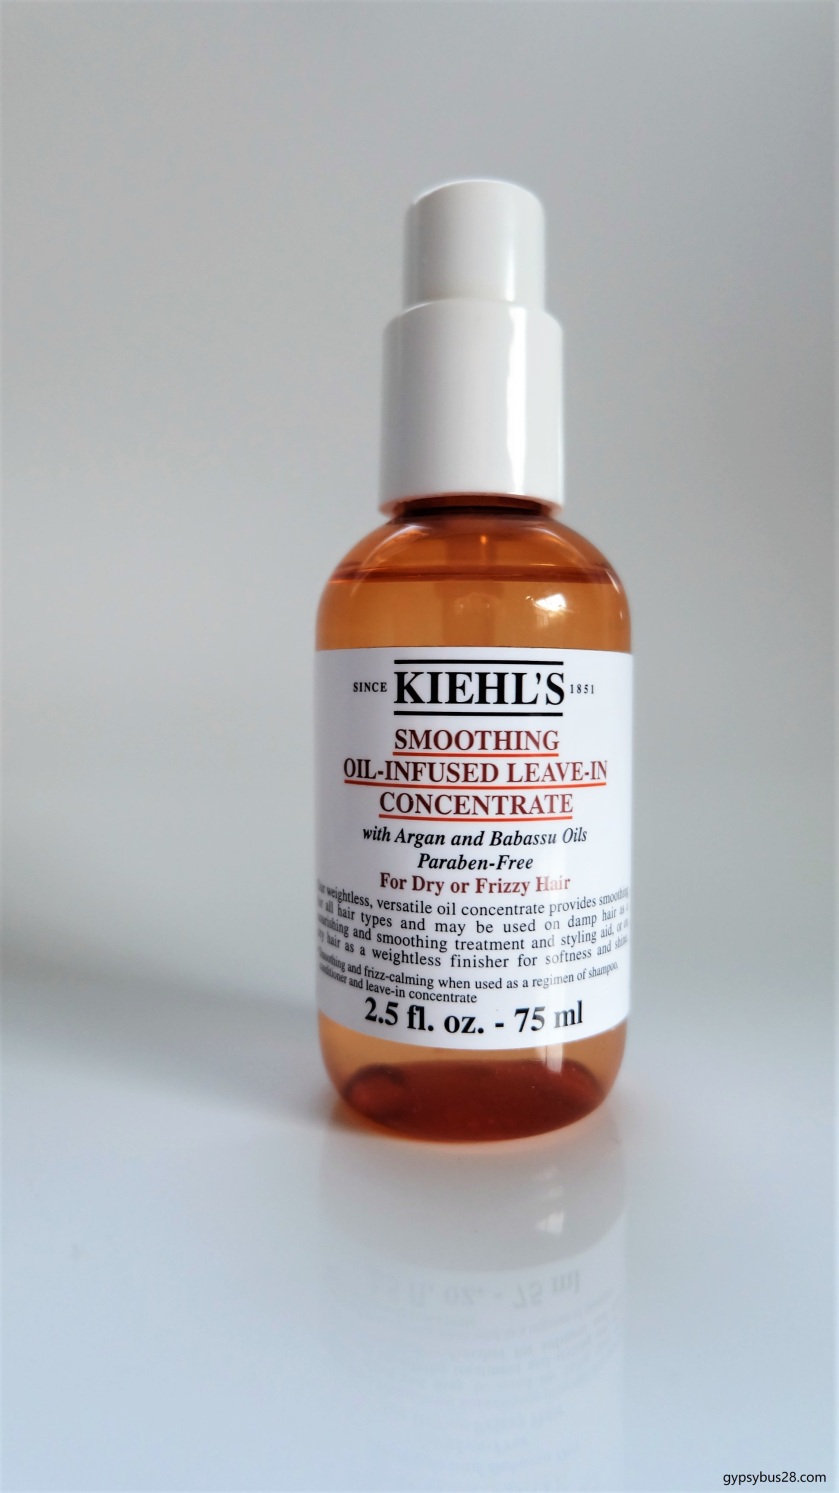 Kiehl's Smoothing Oil-Infused Leave-in Concentrate | Review | GYPSYBUS28